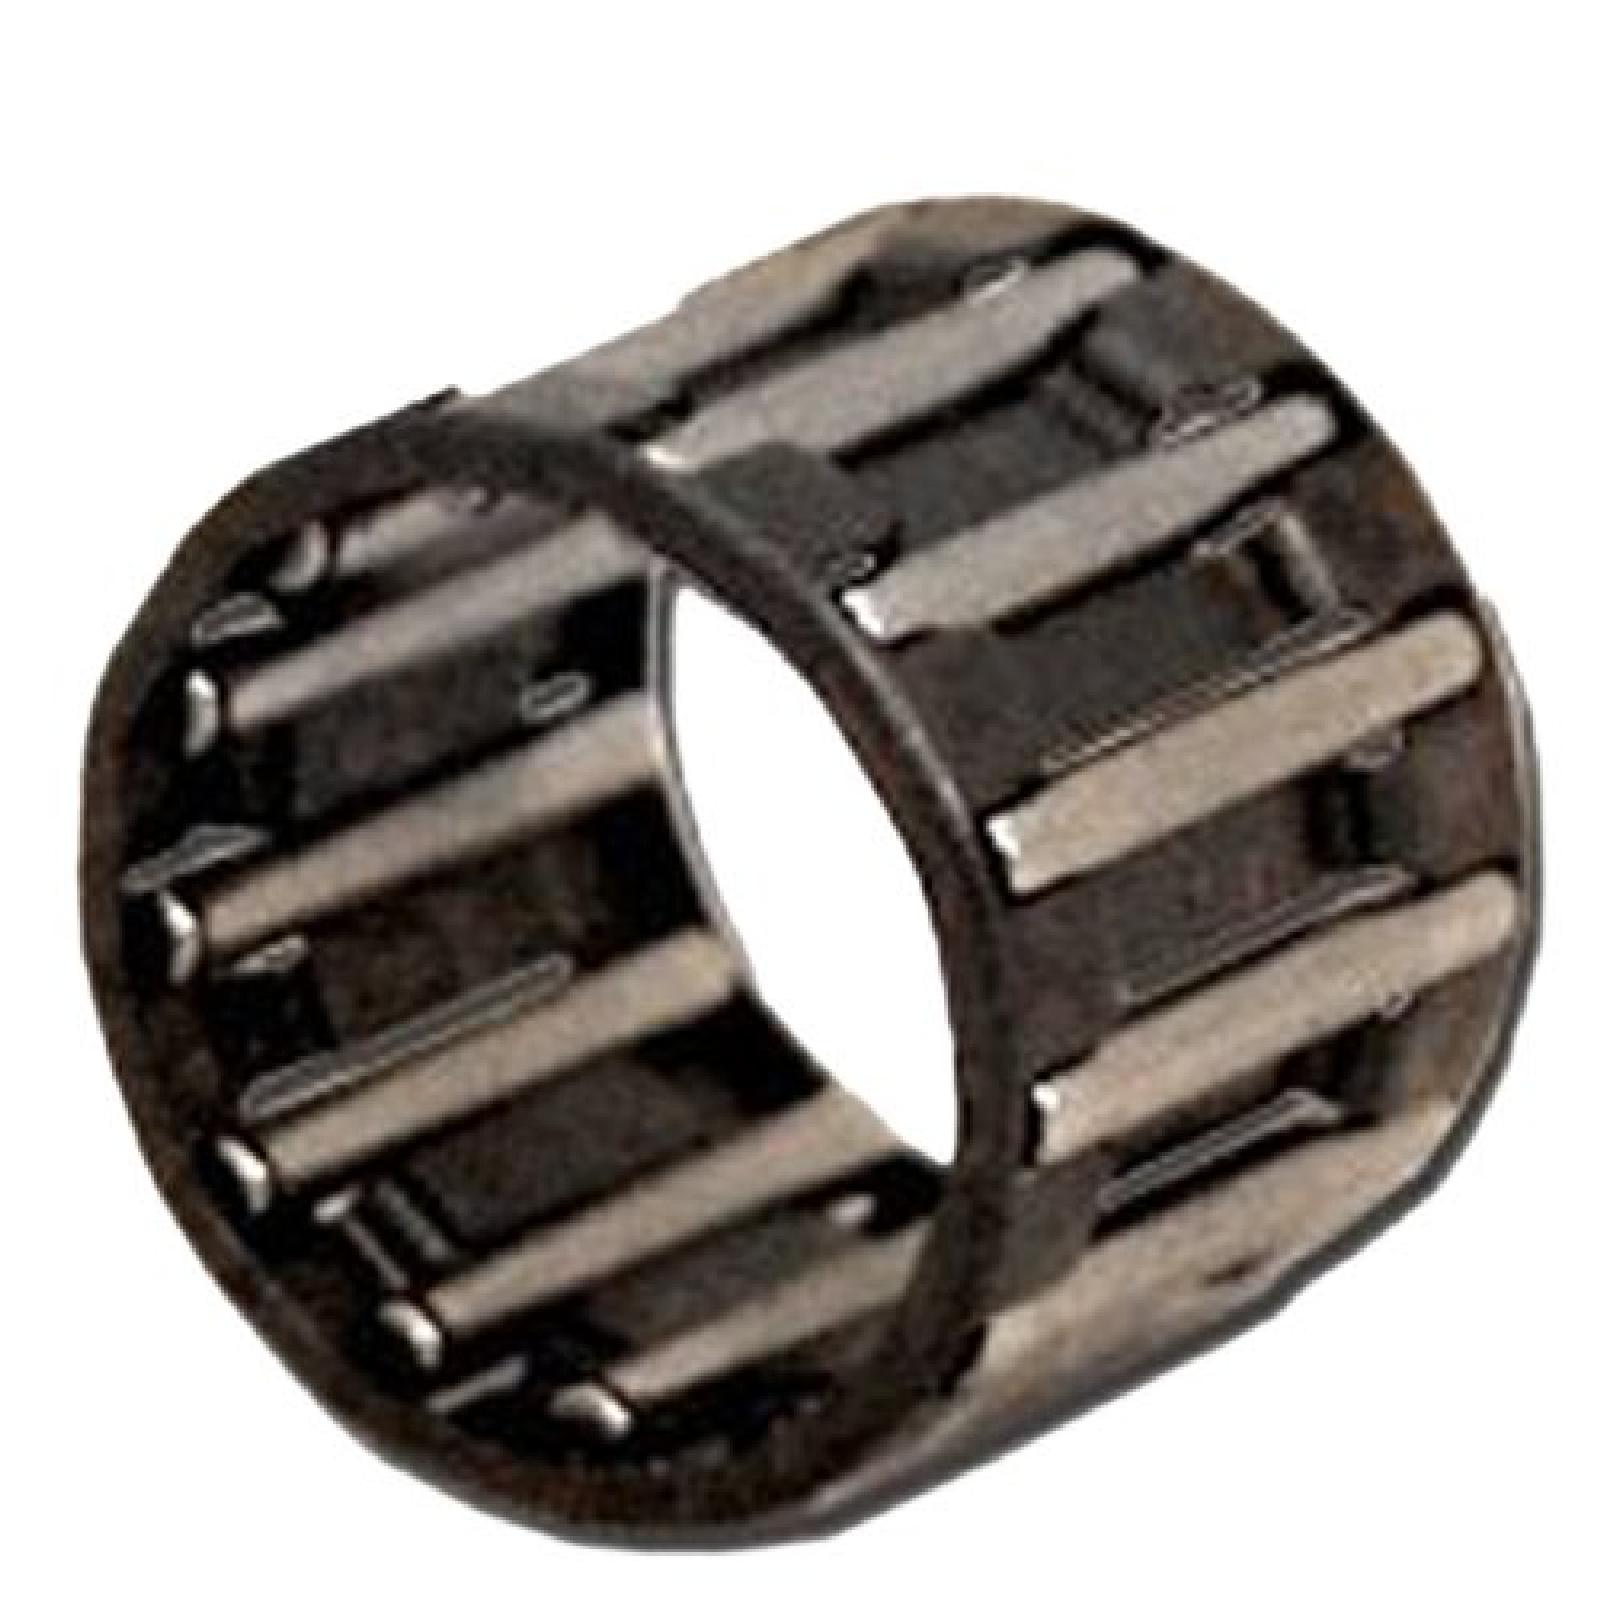 NEEDLE ROLLER BEARING 1.5 part# 11893 by Oregon